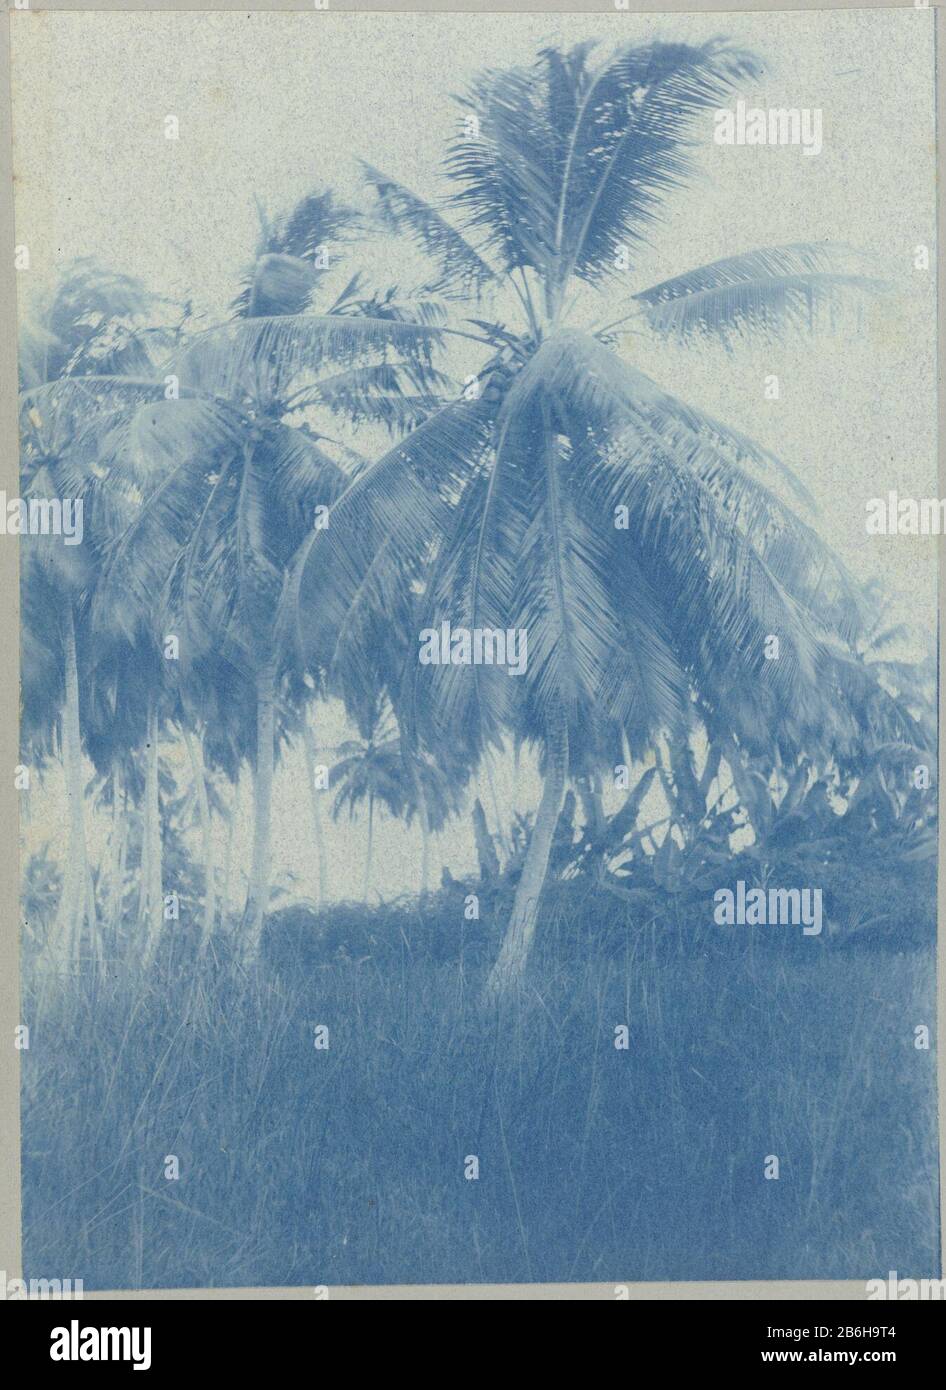 Coronie (title object) Coconut trees in Coronie. Part of the album Souvenir de Voyage (Part 2), about the life of the Doijer family in and around the plantation Ma Retraite in Suriname during the years 1906-1913. Manufacturer : Photographer: Hendrik Doijer (attributed to) Place manufacture: Suriname Date: 1906 - 1913 Physical features: cyanotypie Material: paper Technique: cyanotypie Dimensions: photo: h 169 mm × W 121 mm Date: 1906 - 1913 Stock Photo